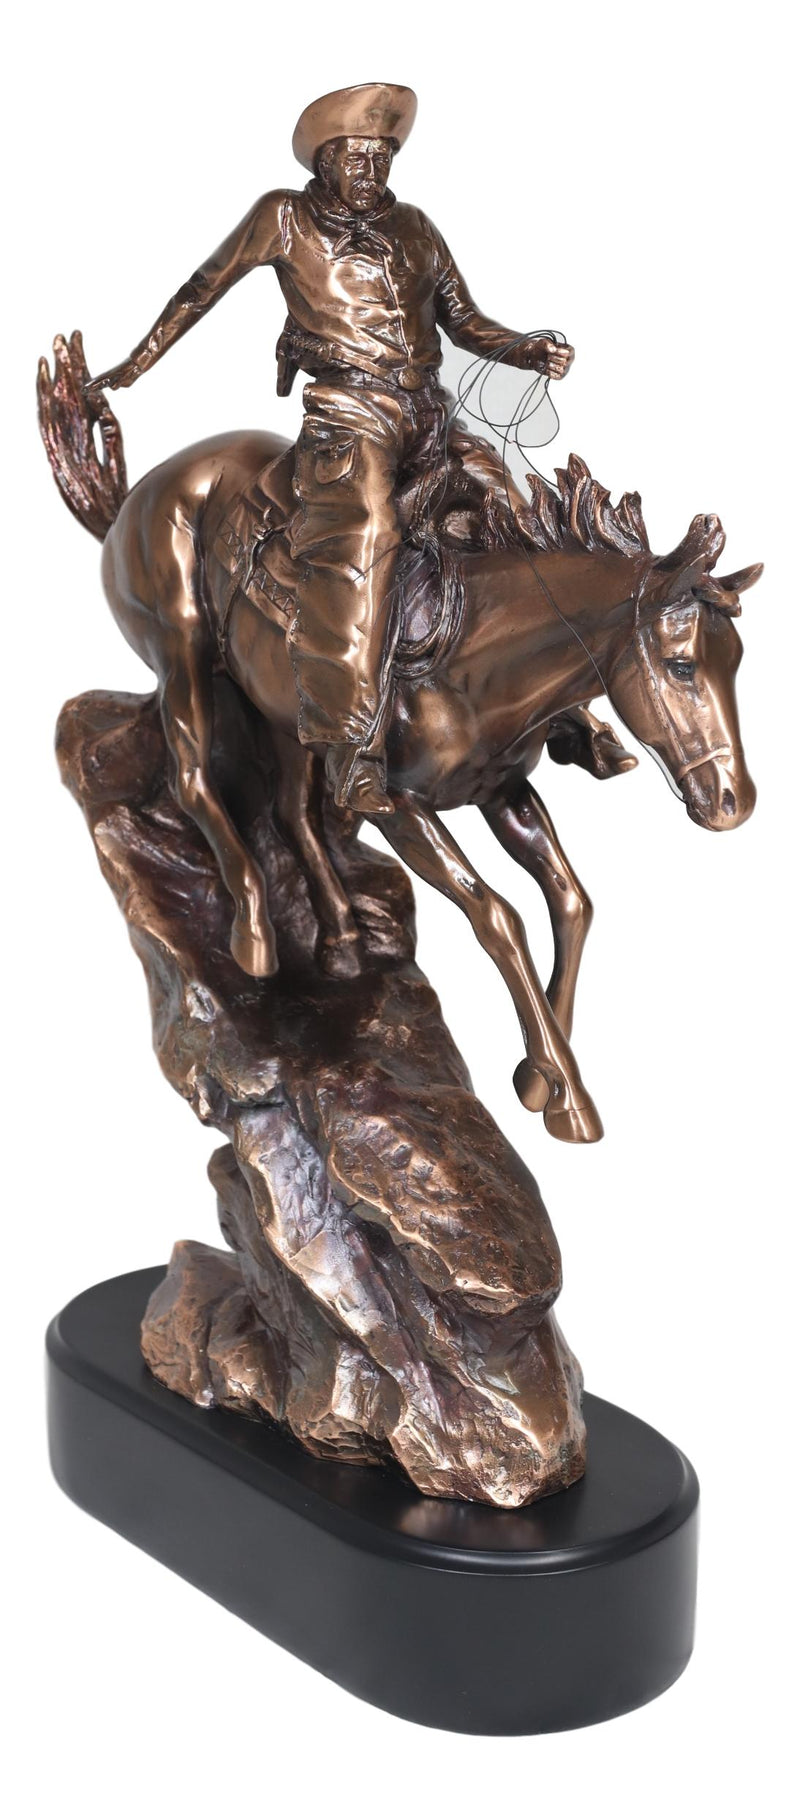 Ebros Rustic Wild West Cowboy Bandit Racing Down Rocky Slope On Horse Statue